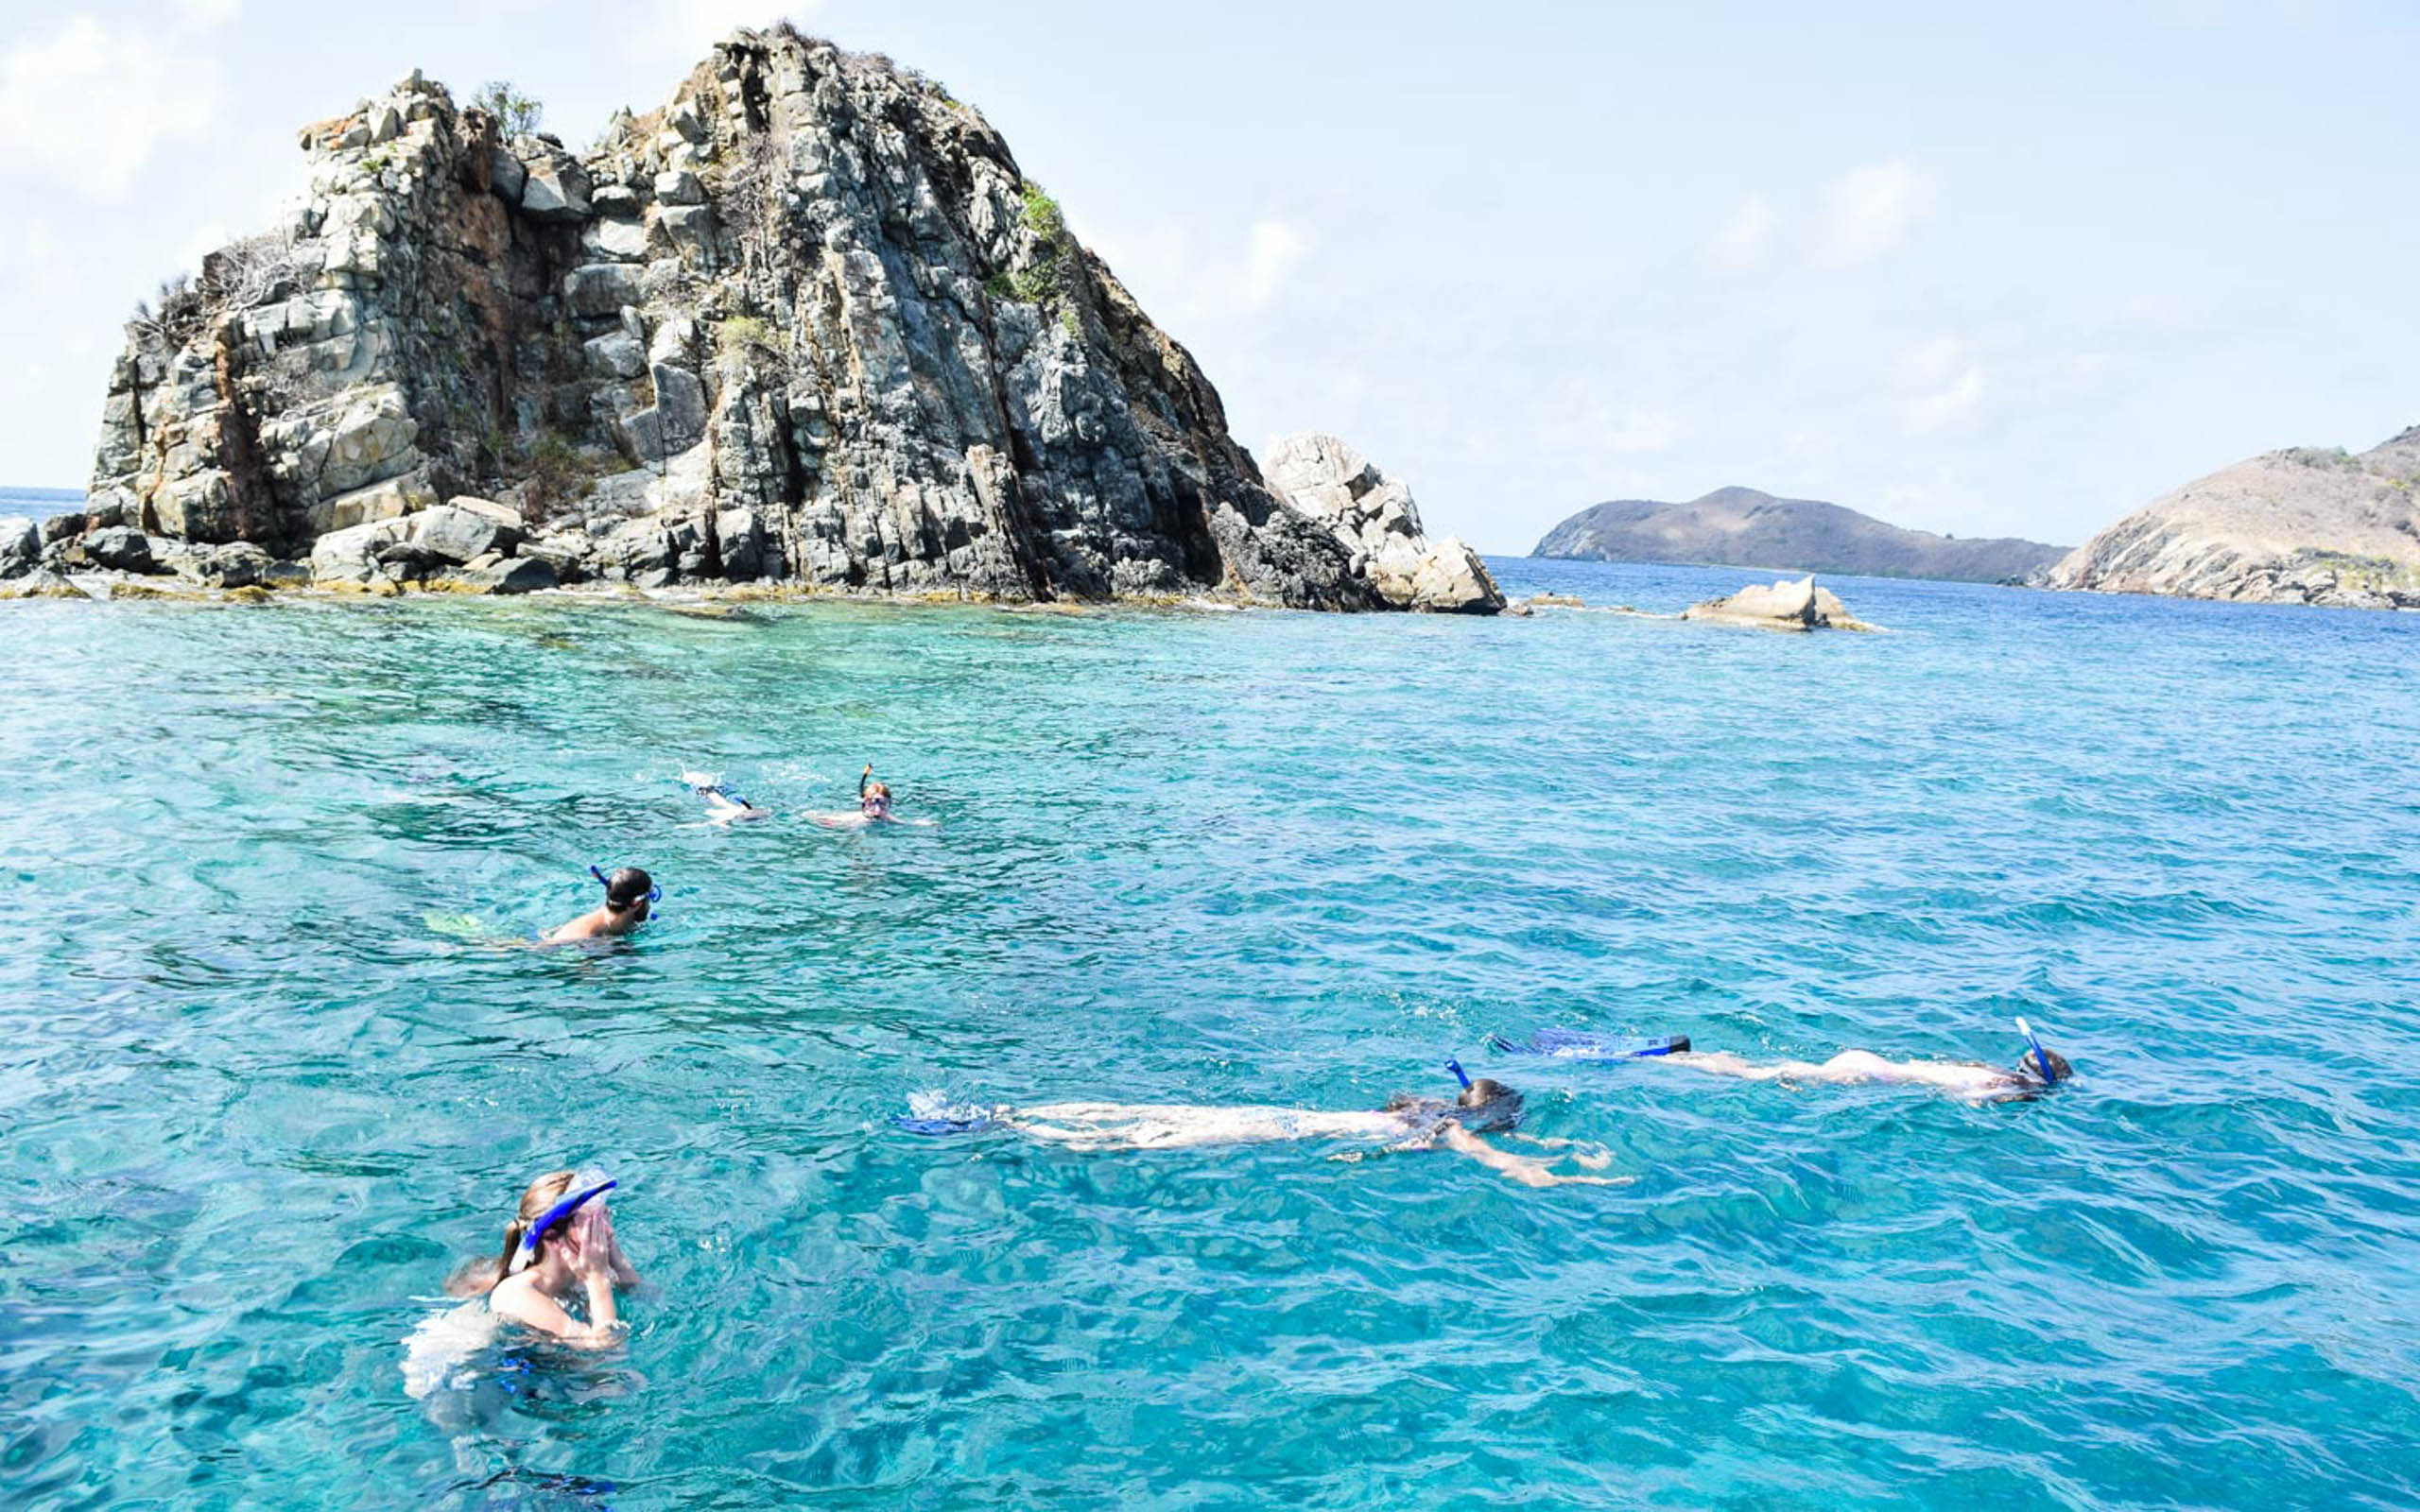 A group of people snorkling in the water near a rock.